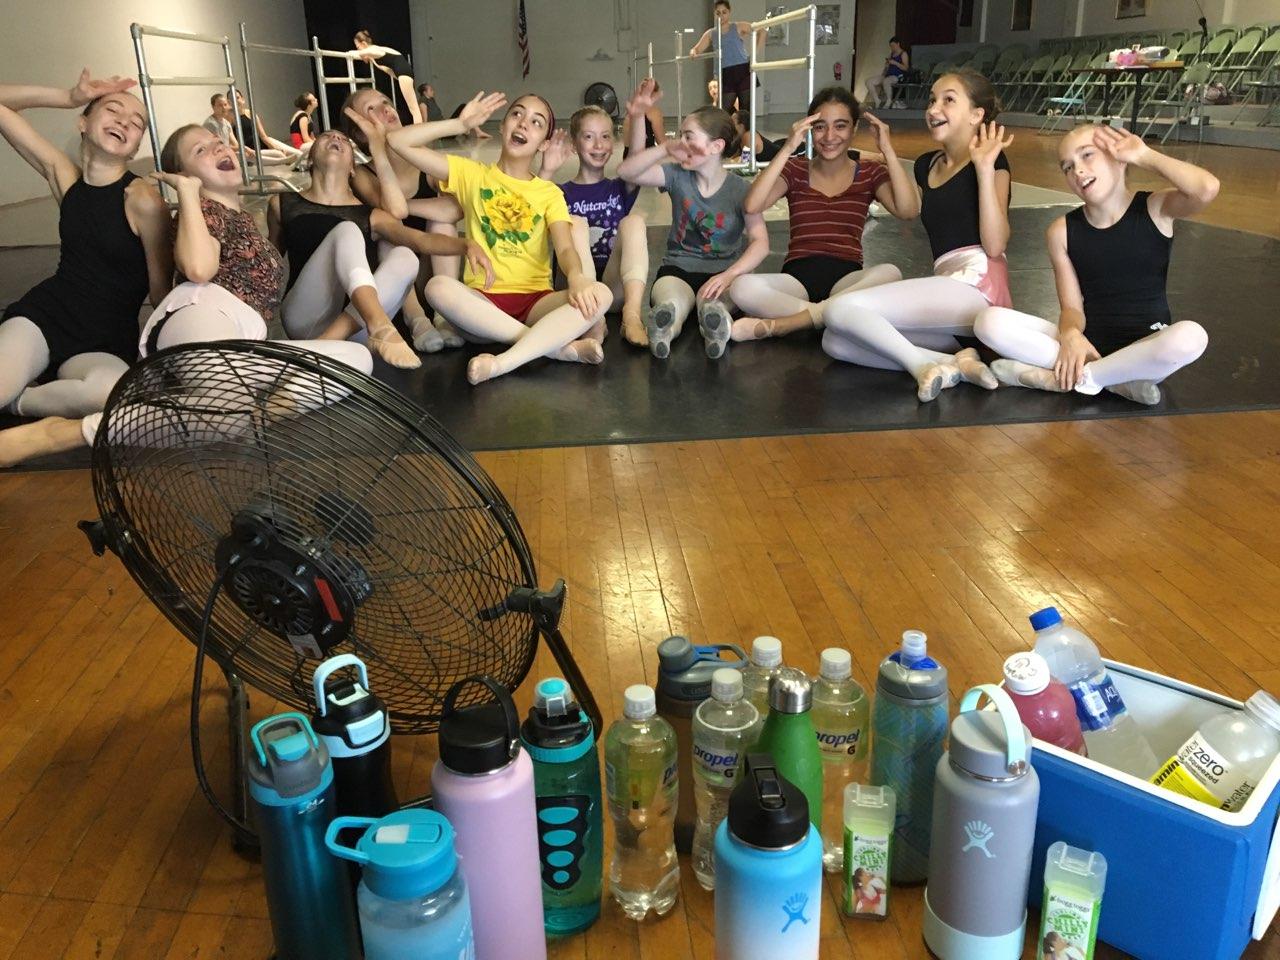 Opus Dancers Making the Best of a Hot Studio Day